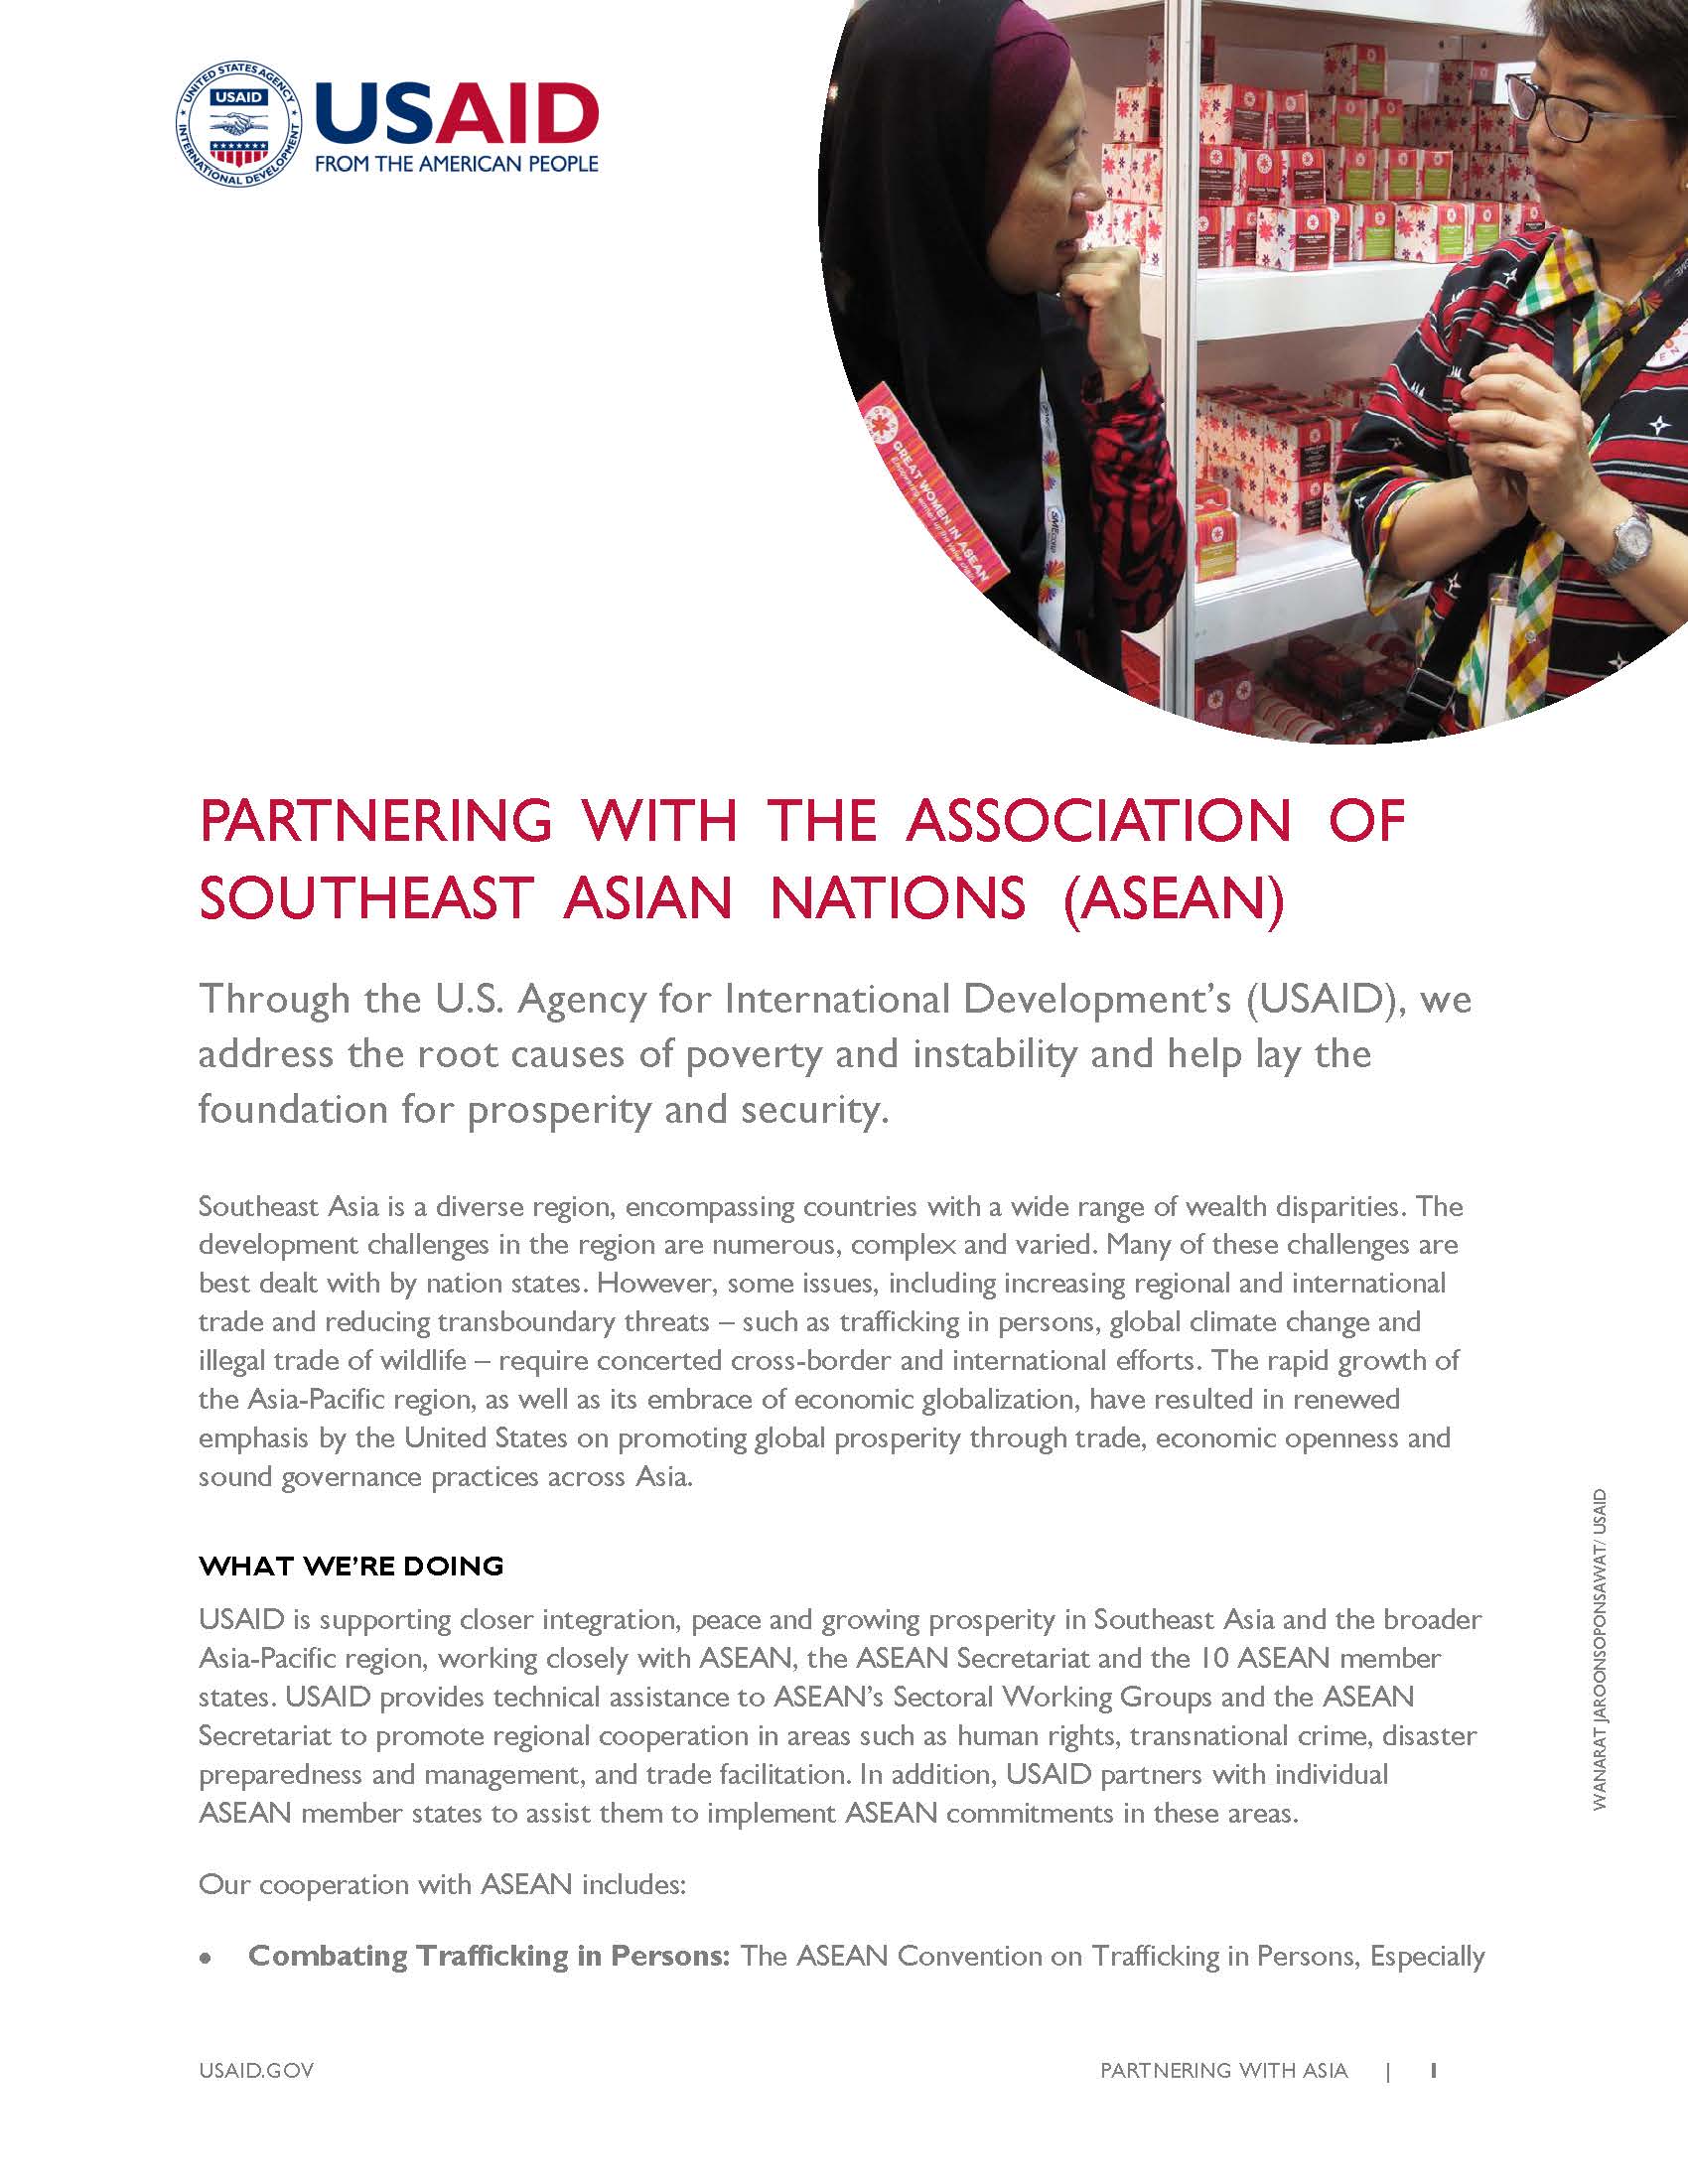 Partnering with the Association of Southeast Asian Nations (ASEAN)